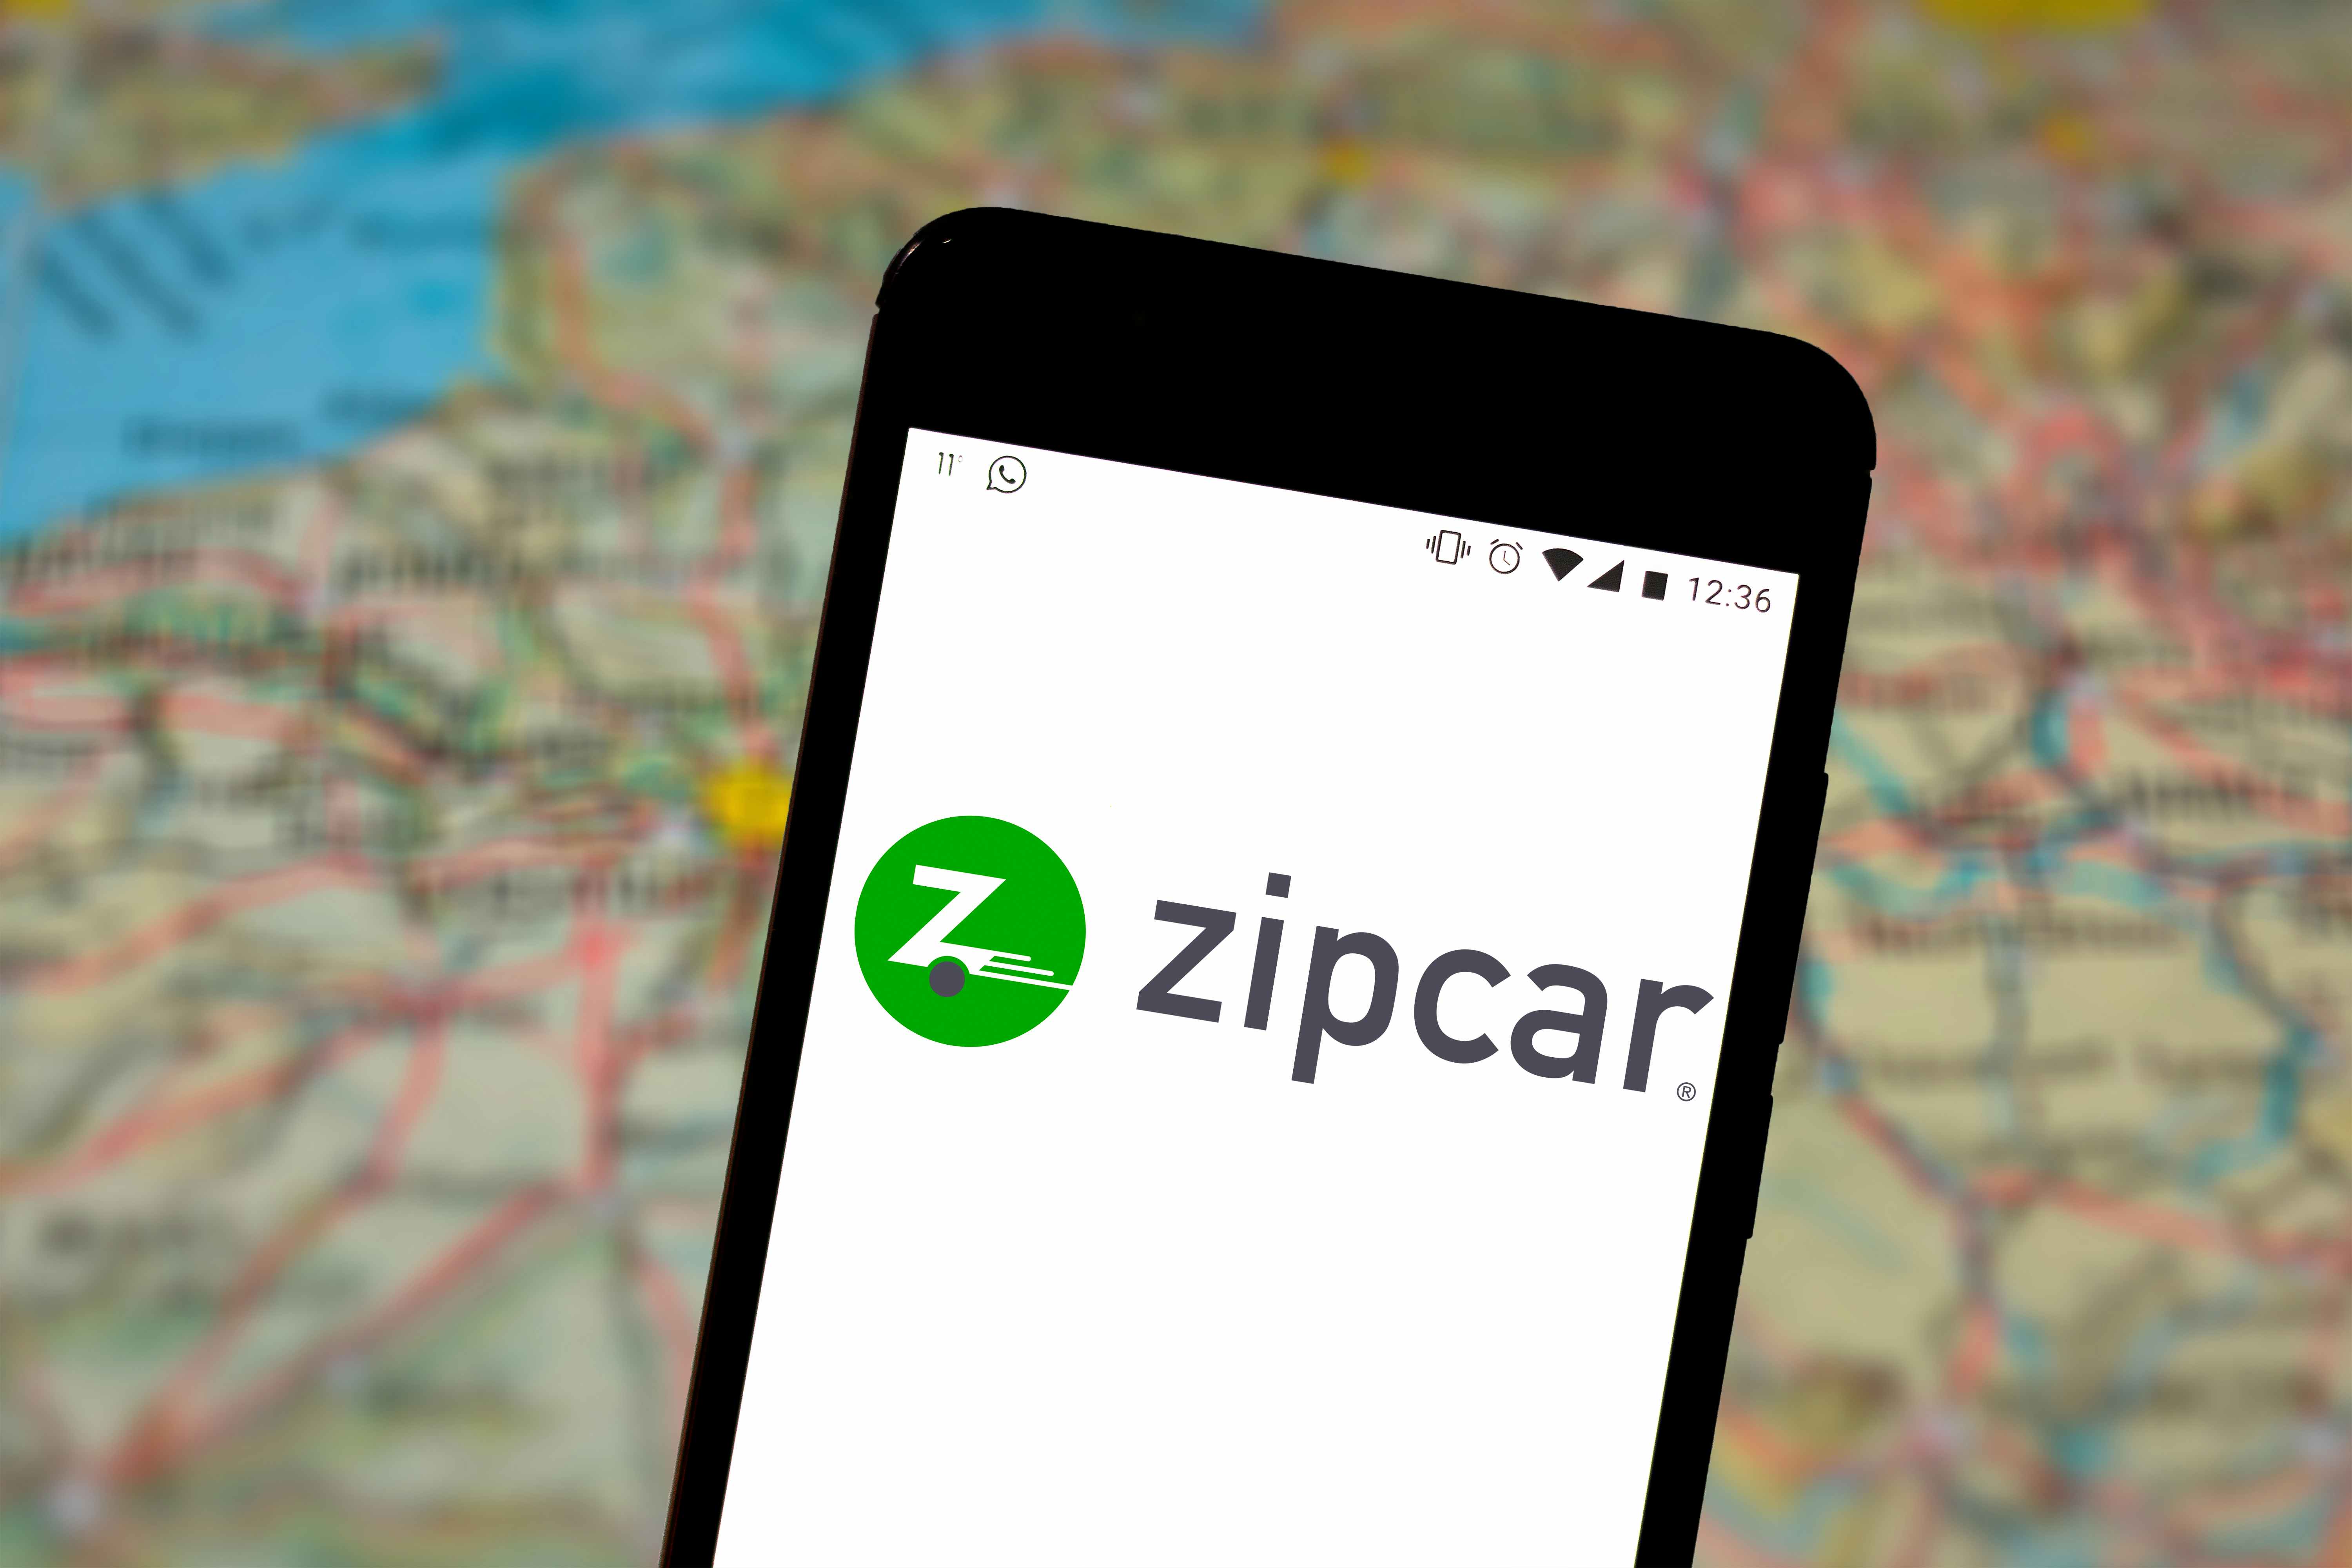 Zipcar logo on iphone with a blurred map as the background